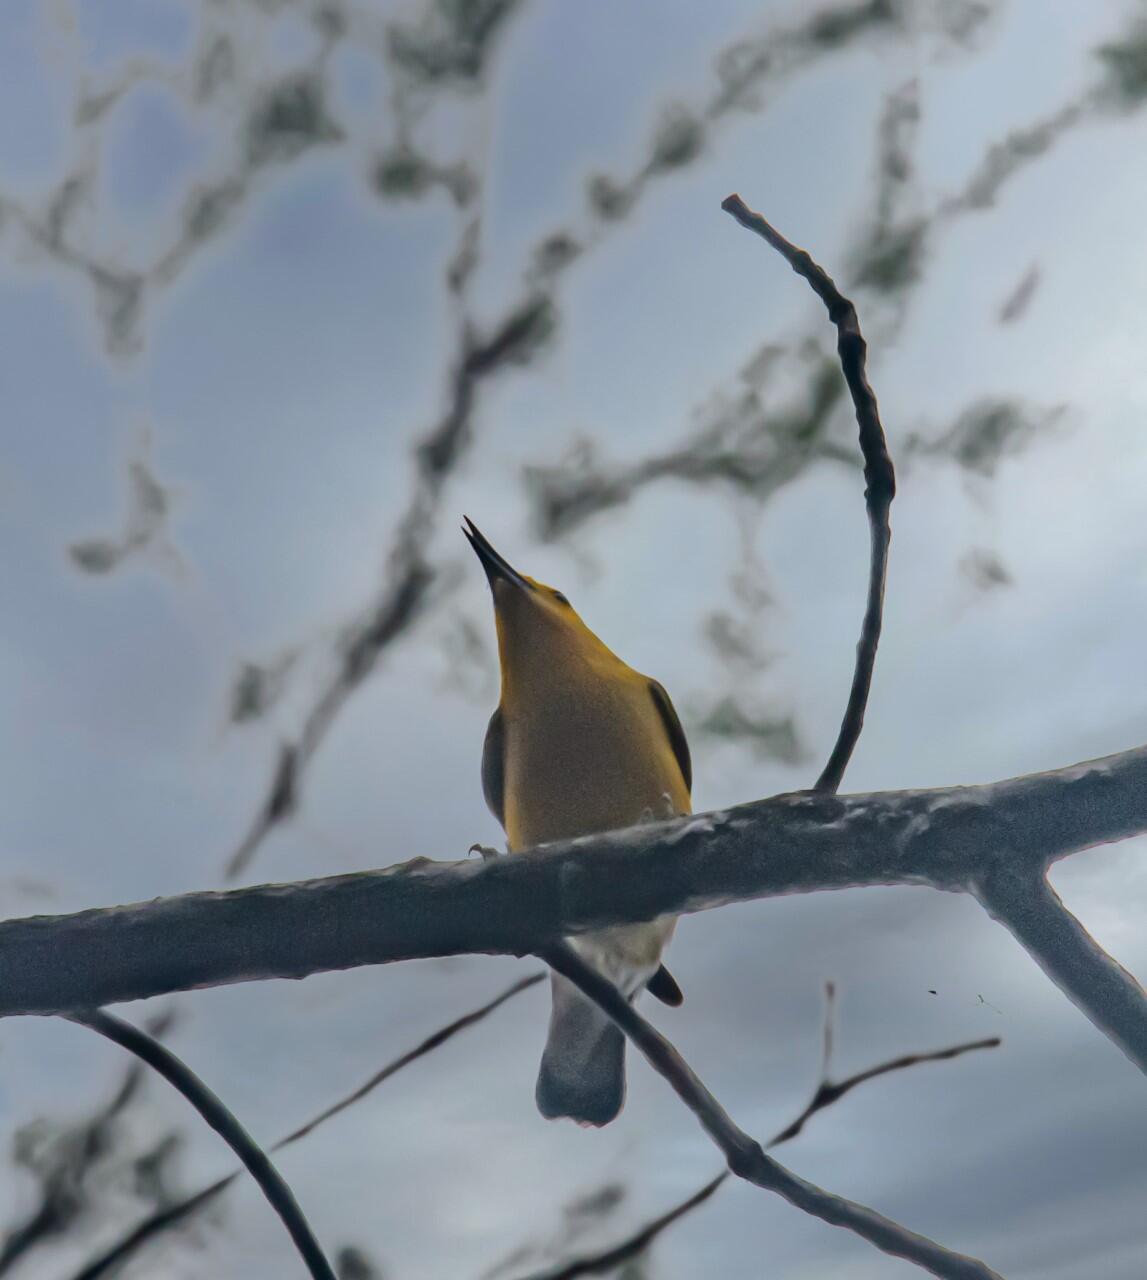 This picture was taken looking up at a yellow bird with slender long beak perched high up on a branch with light blue sky behind the bird. 